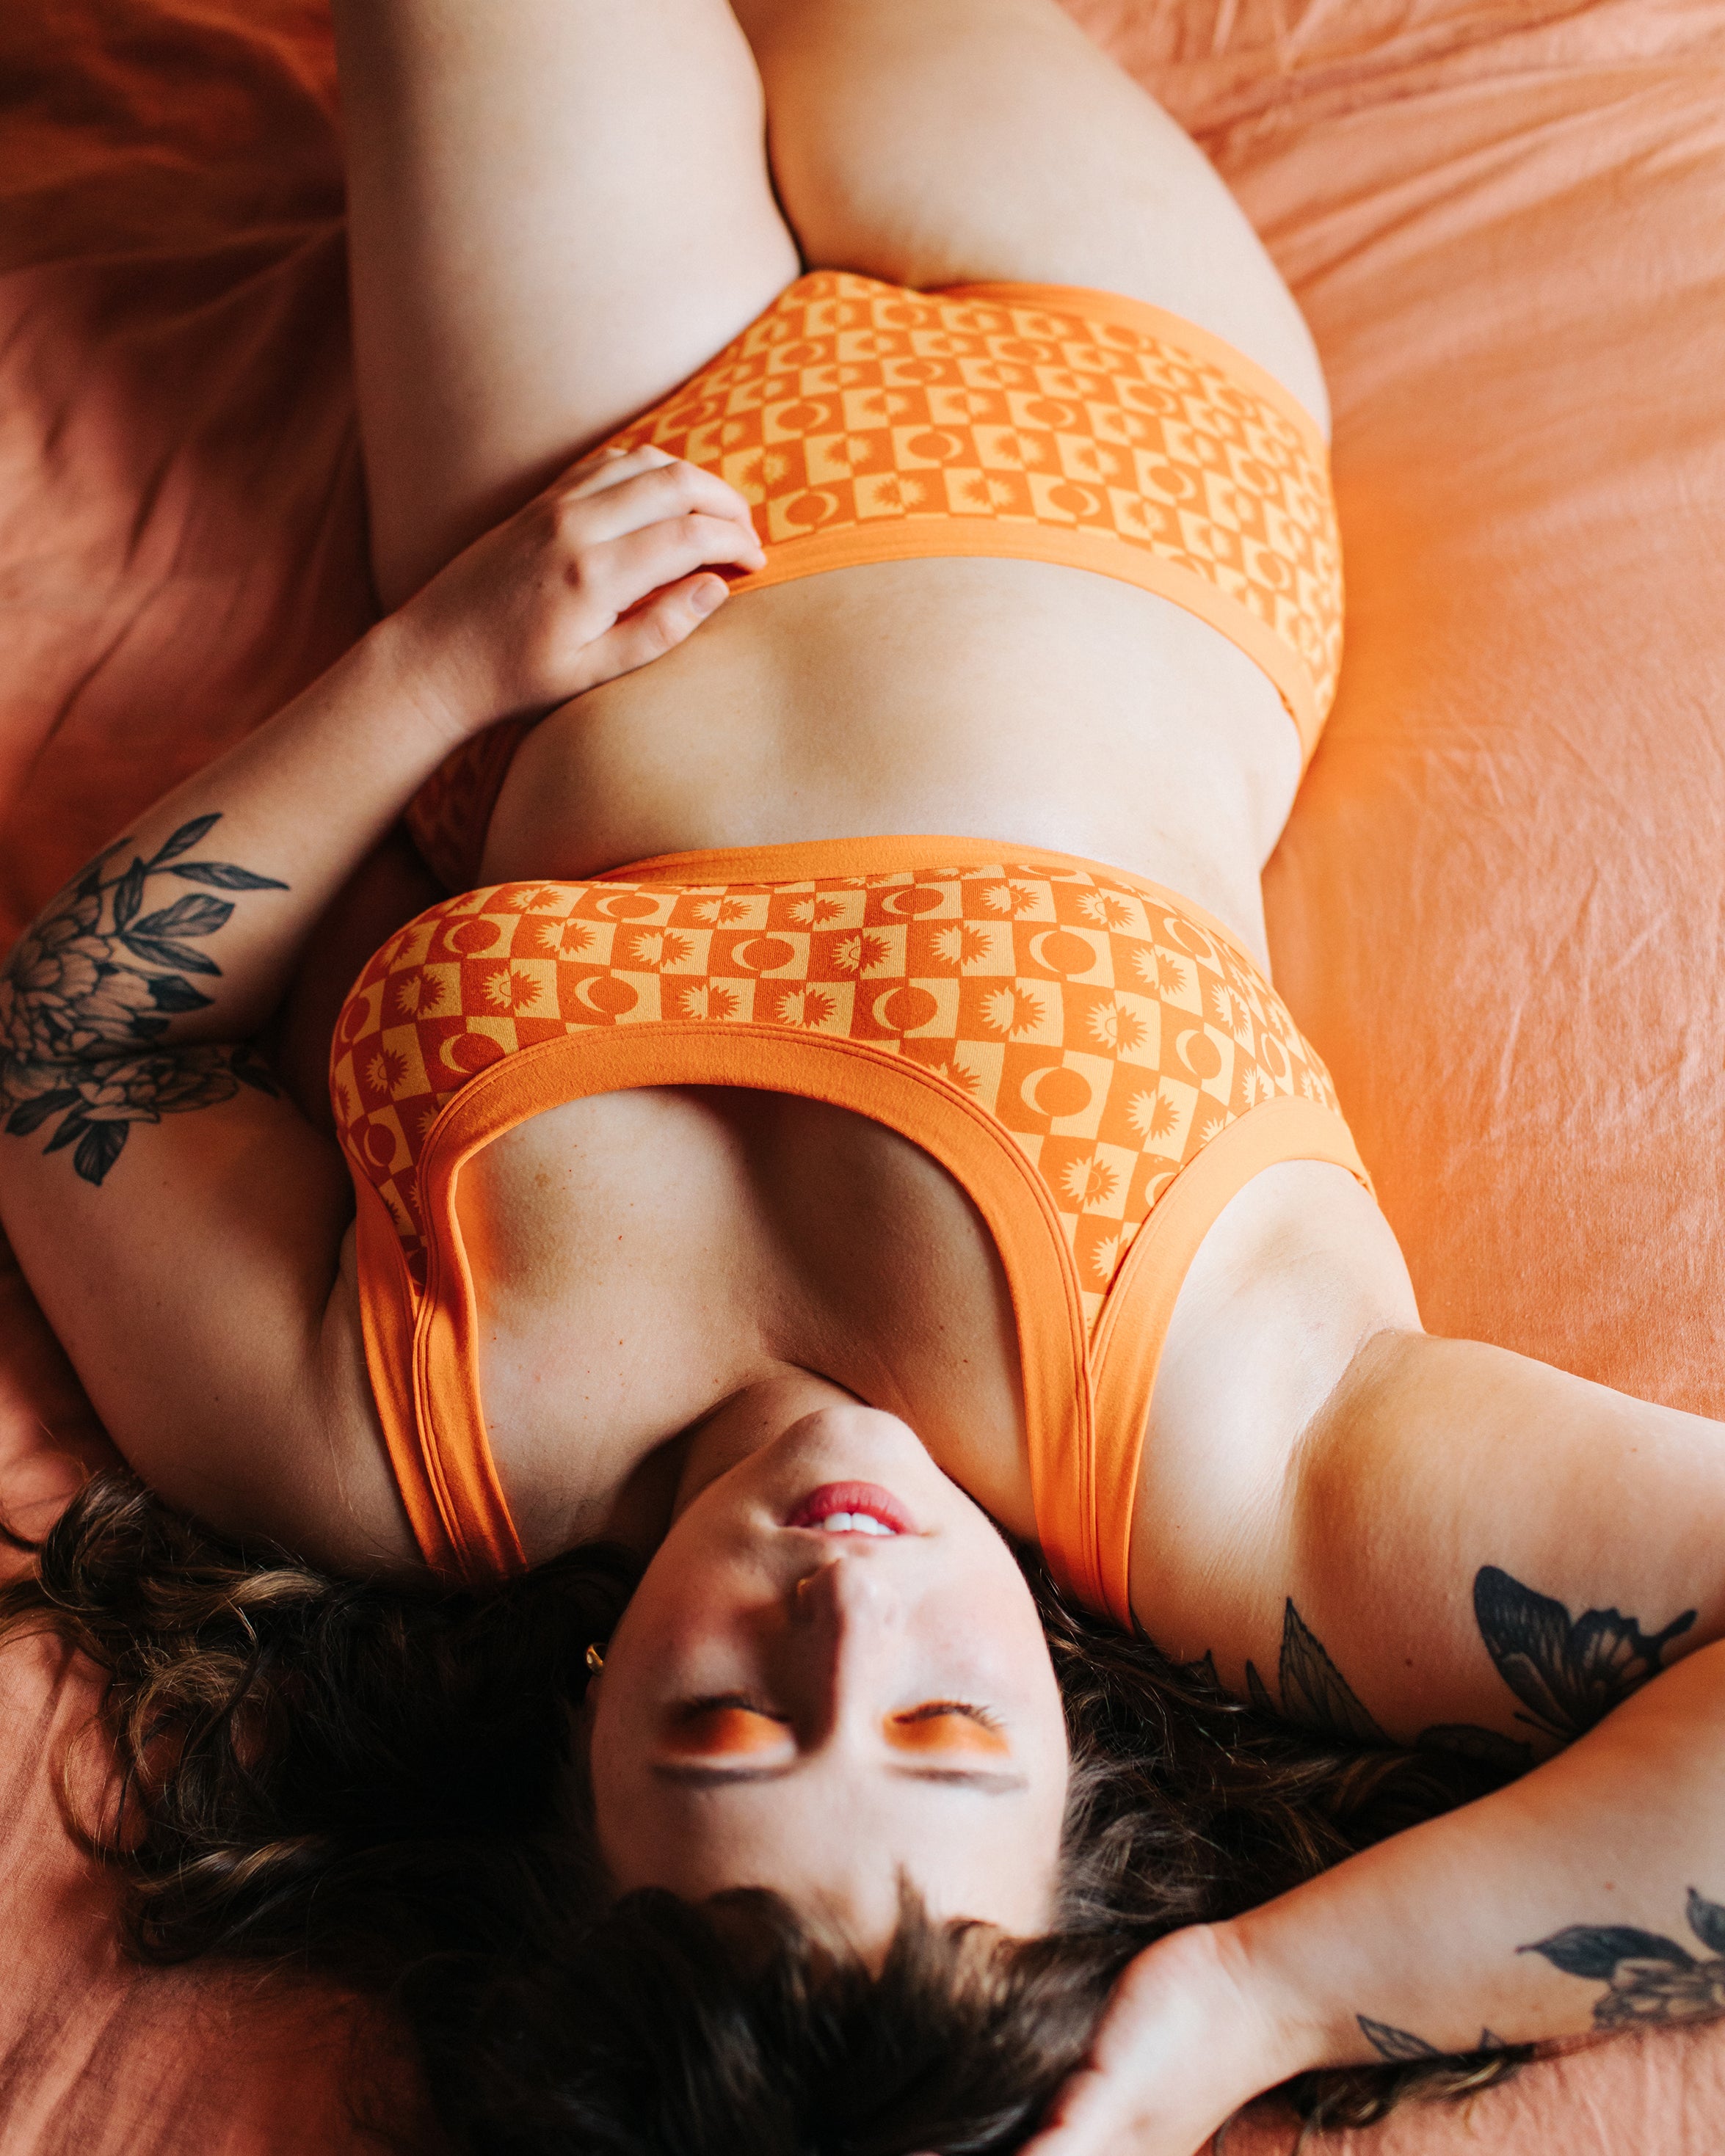 Model laying down wearing Thunderpants Original style underwear in Autumn Equinox print.